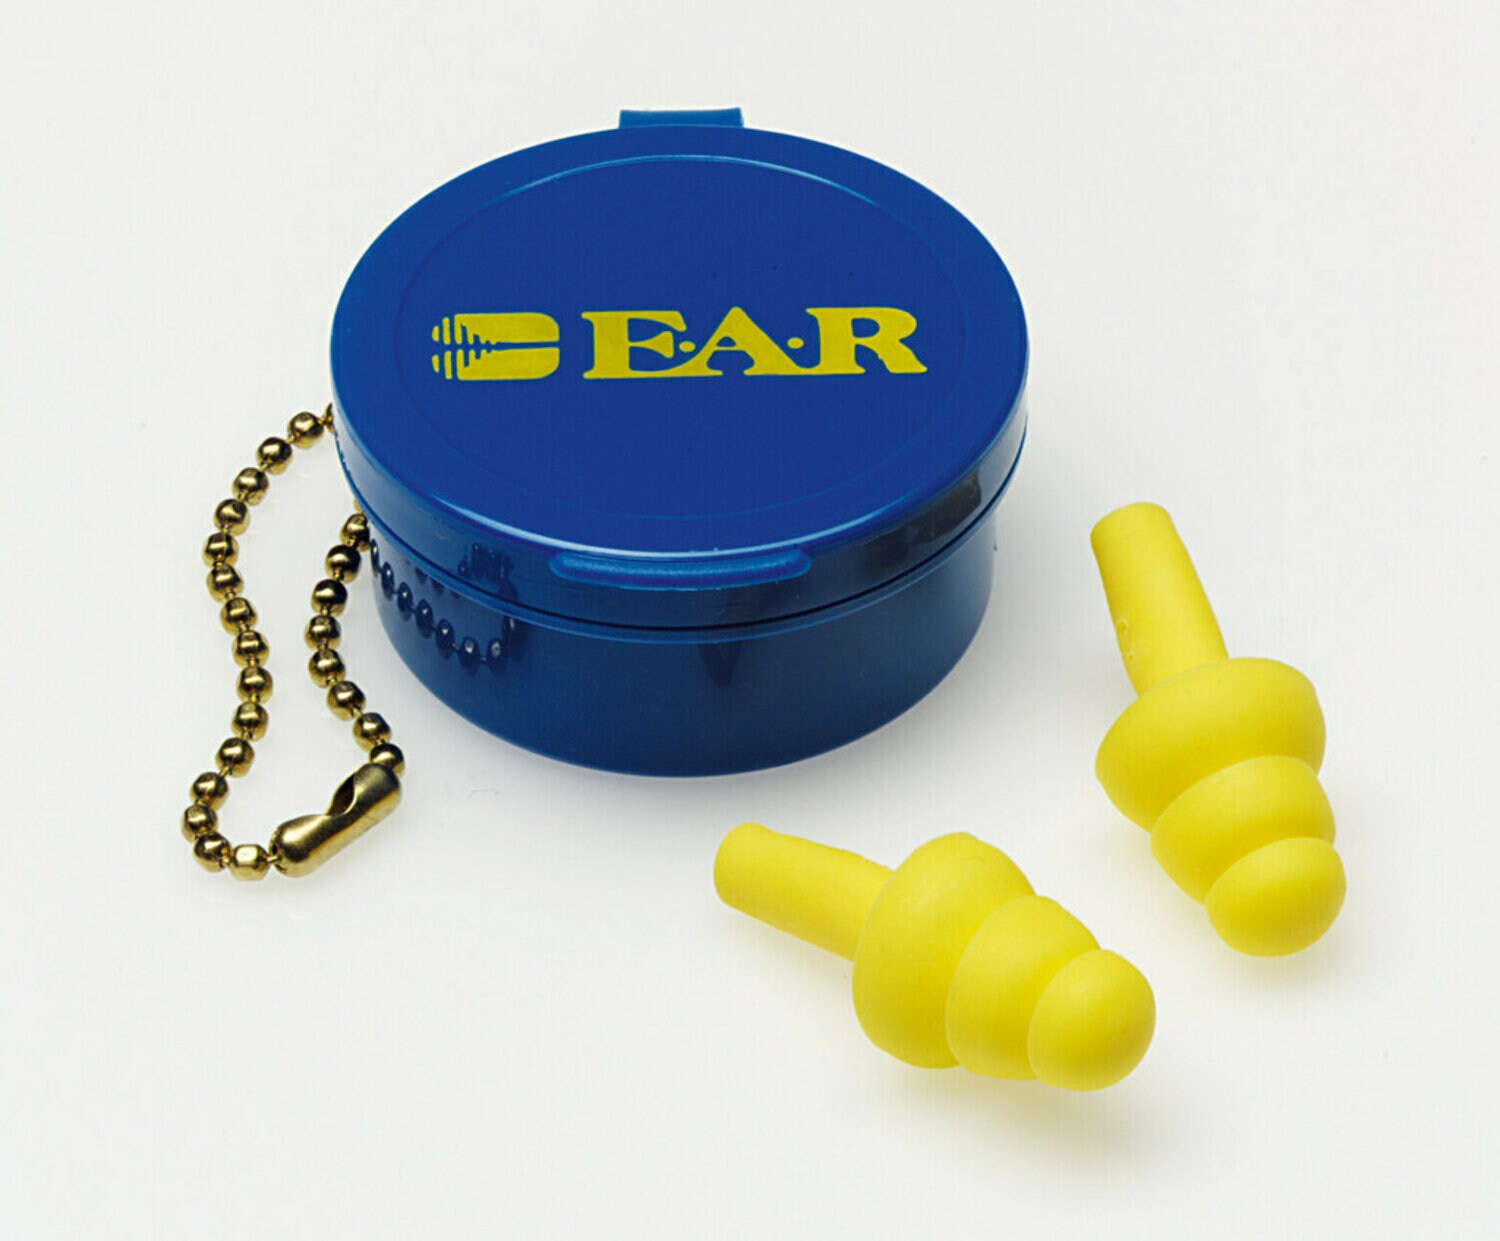 7000002335 - 3M E-A-R UltraFit Earplugs 340-4001, Uncorded, Carrying Case, 200
Pair/Case